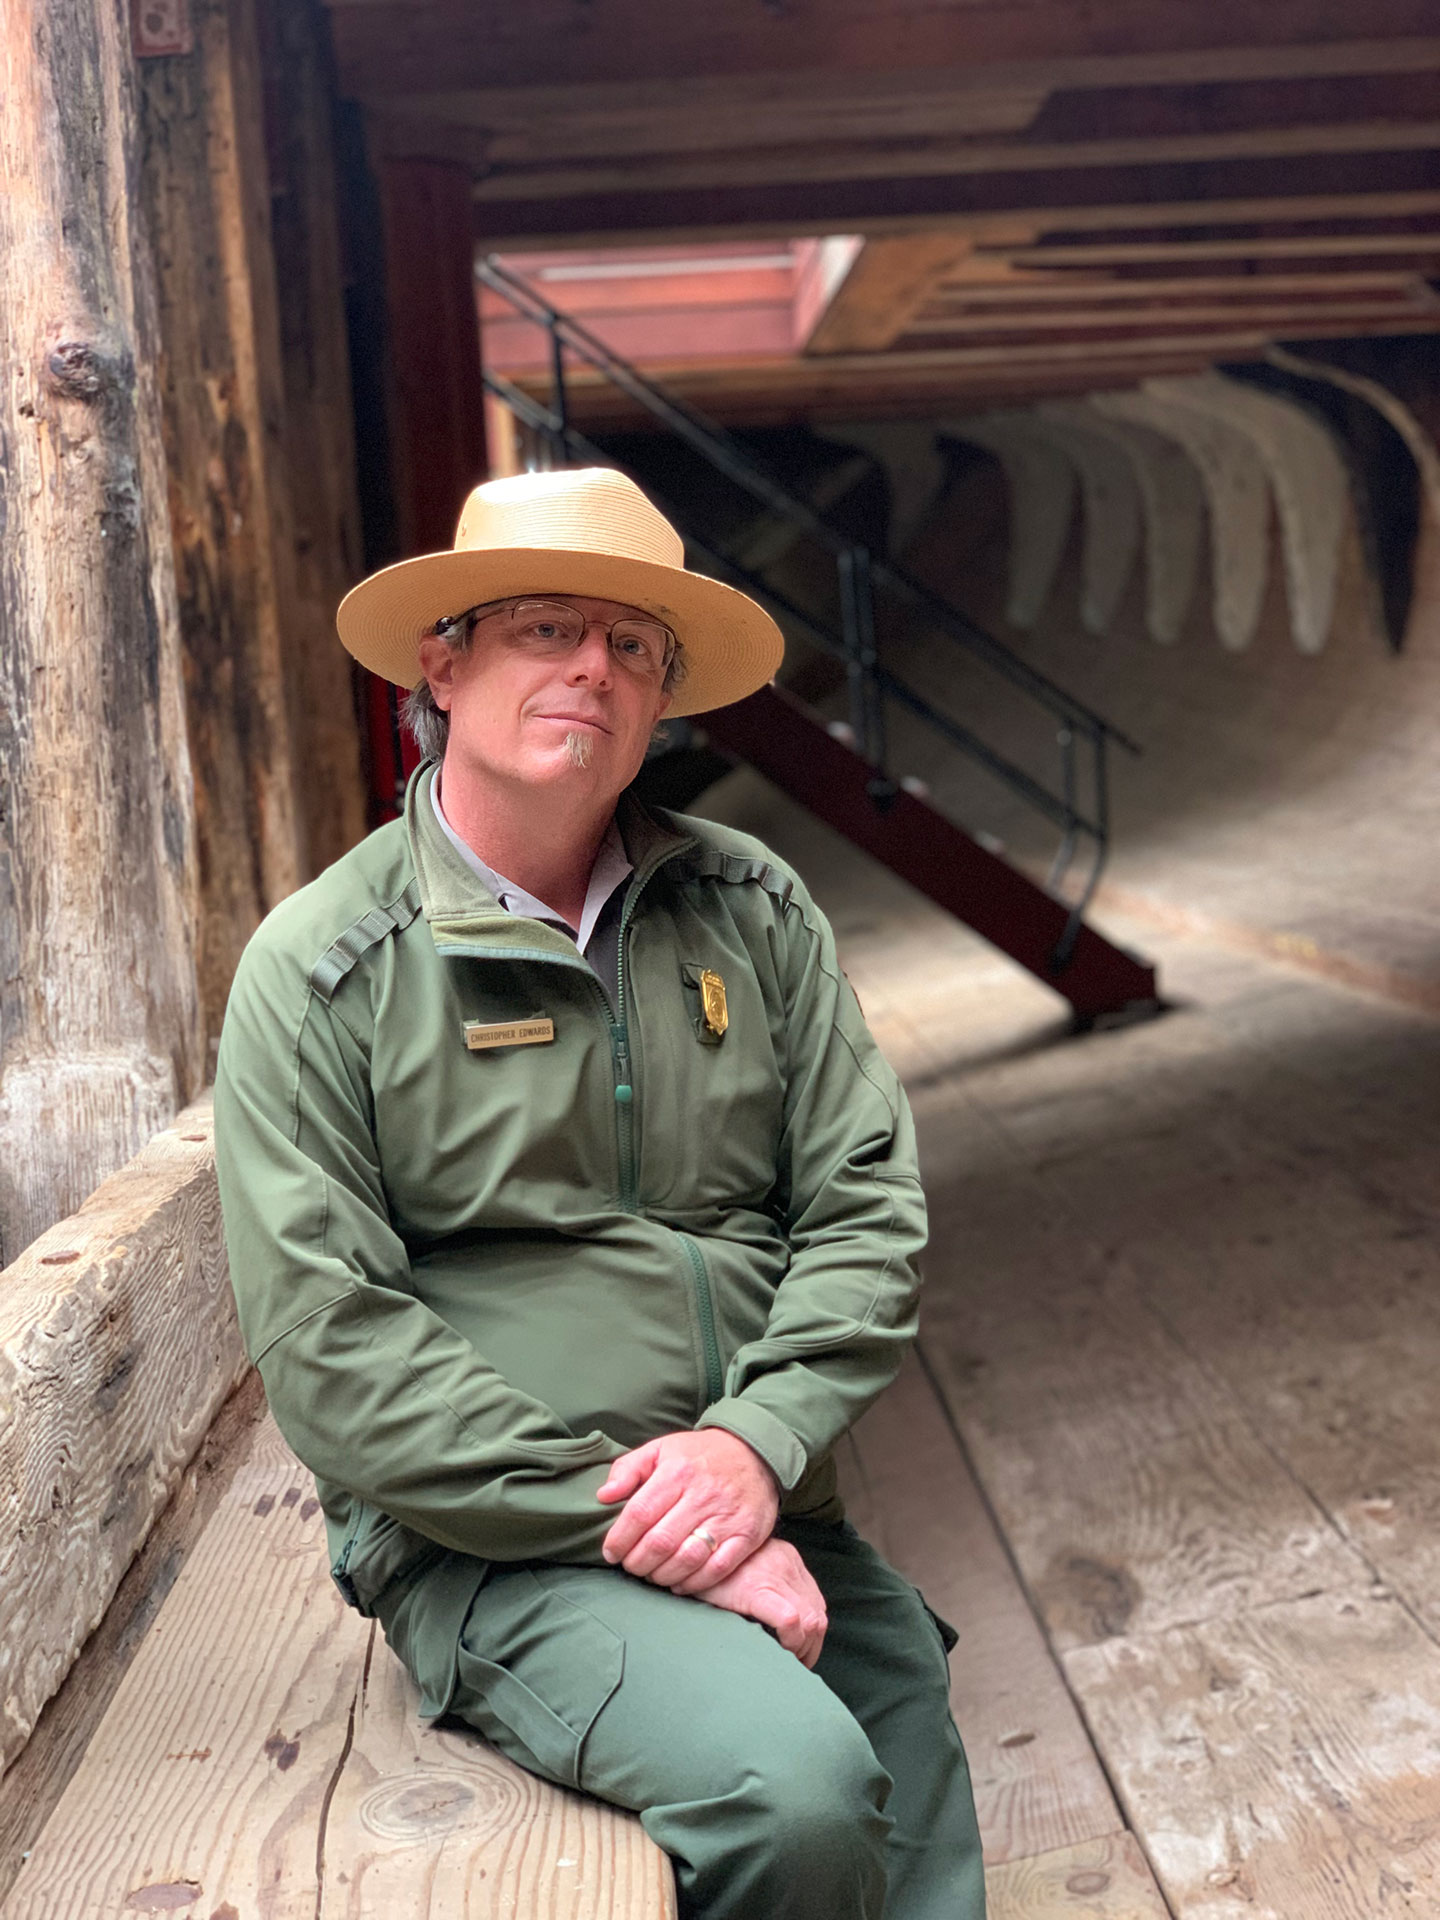 A man in a green park ranger uniform with a brimmed hat poses for a picture sitting in the hold of a large wooden ship.